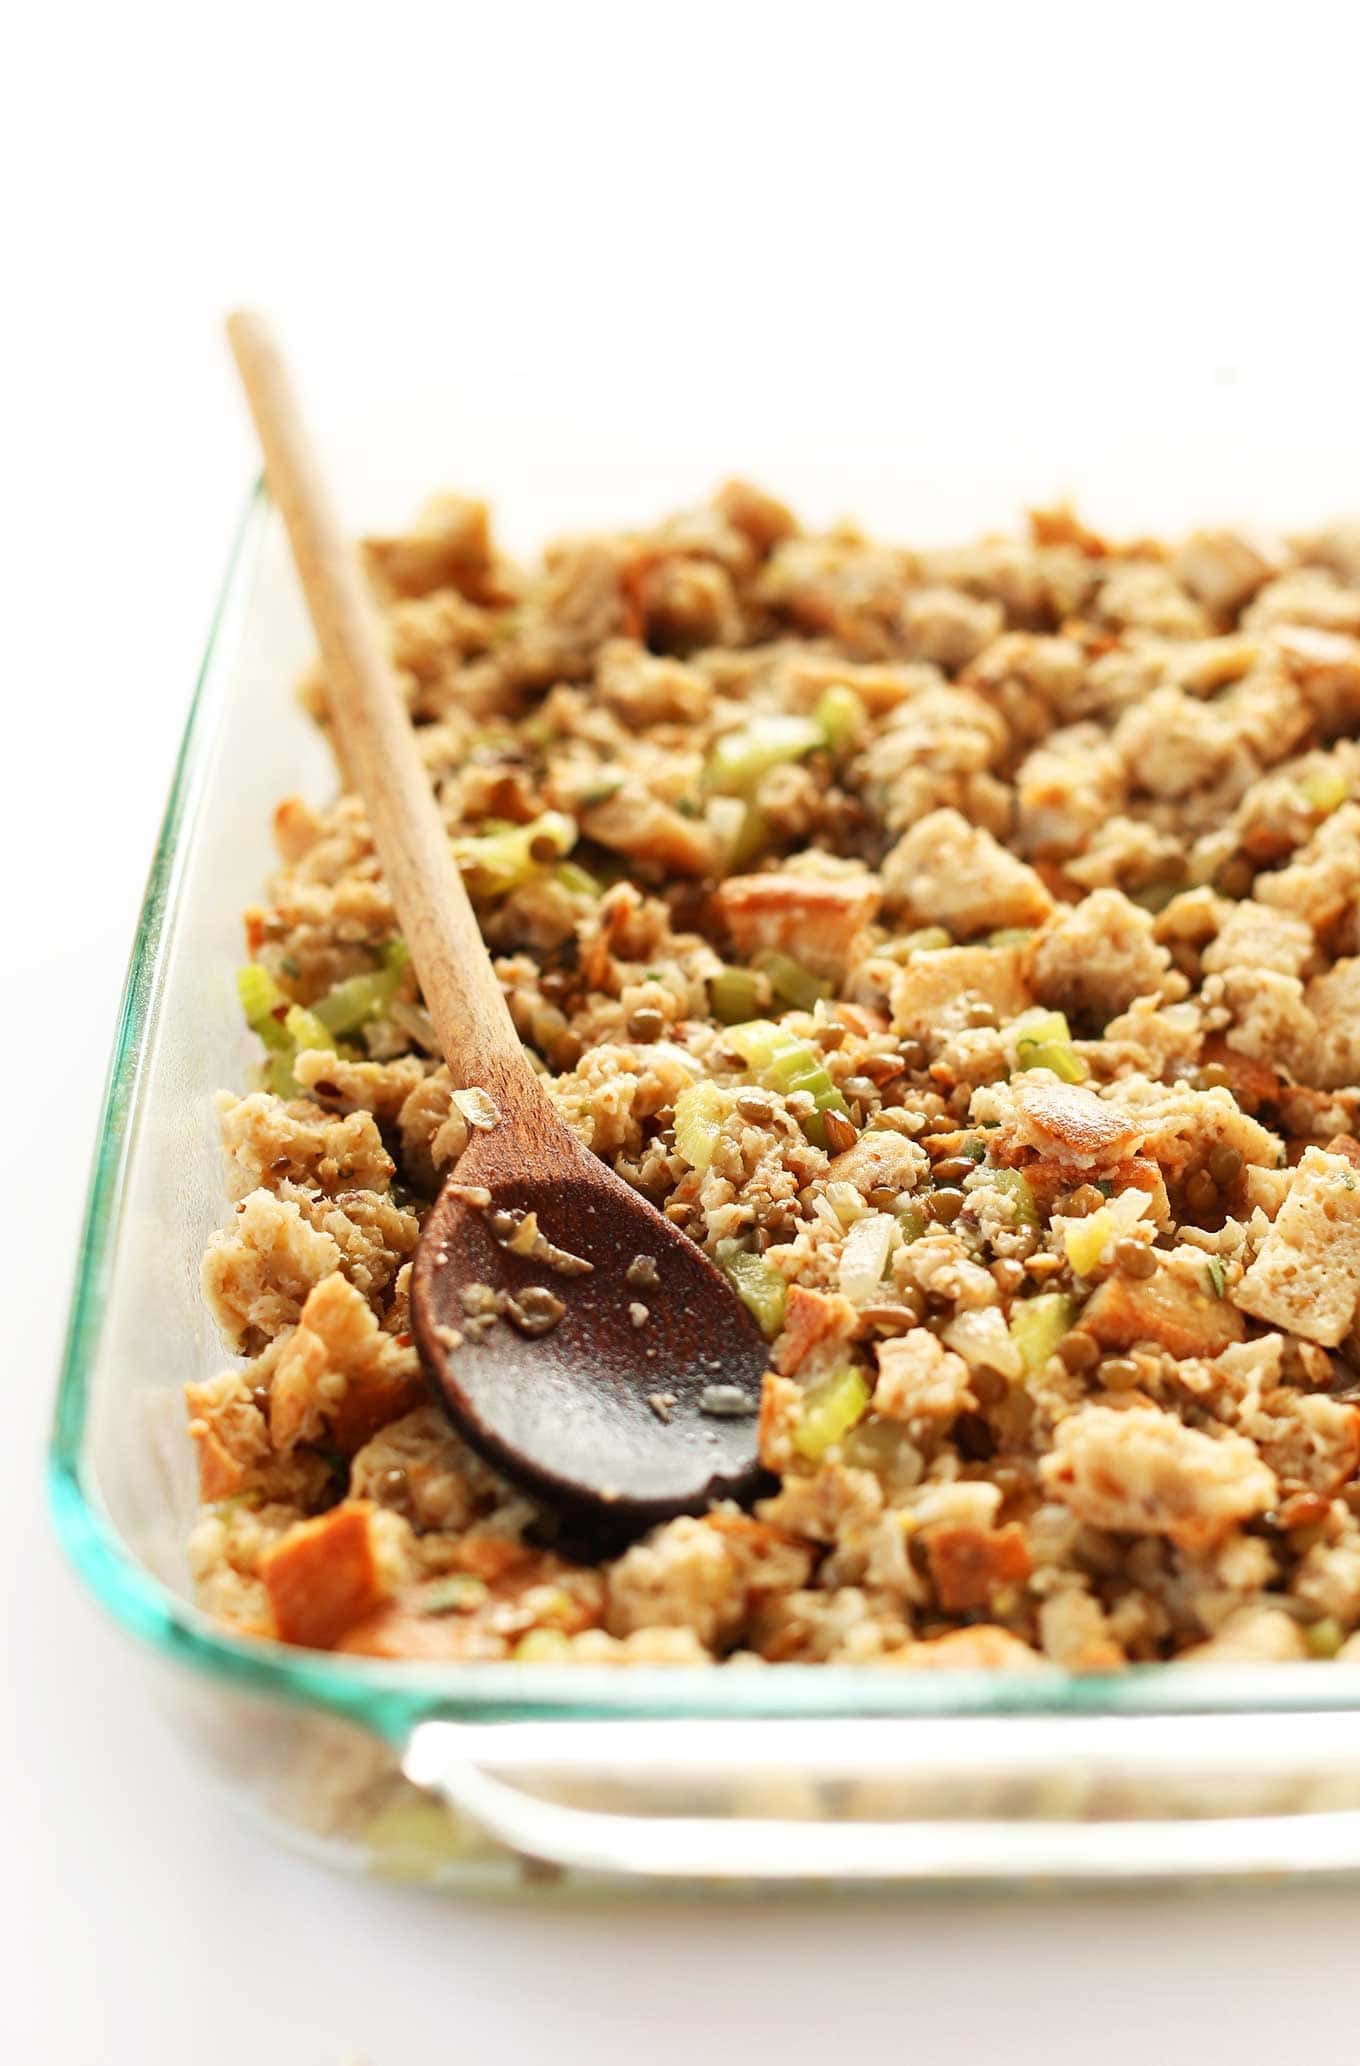 Vegan stuffing with celery, sage, onions and whole grain bread on a glass dish.  